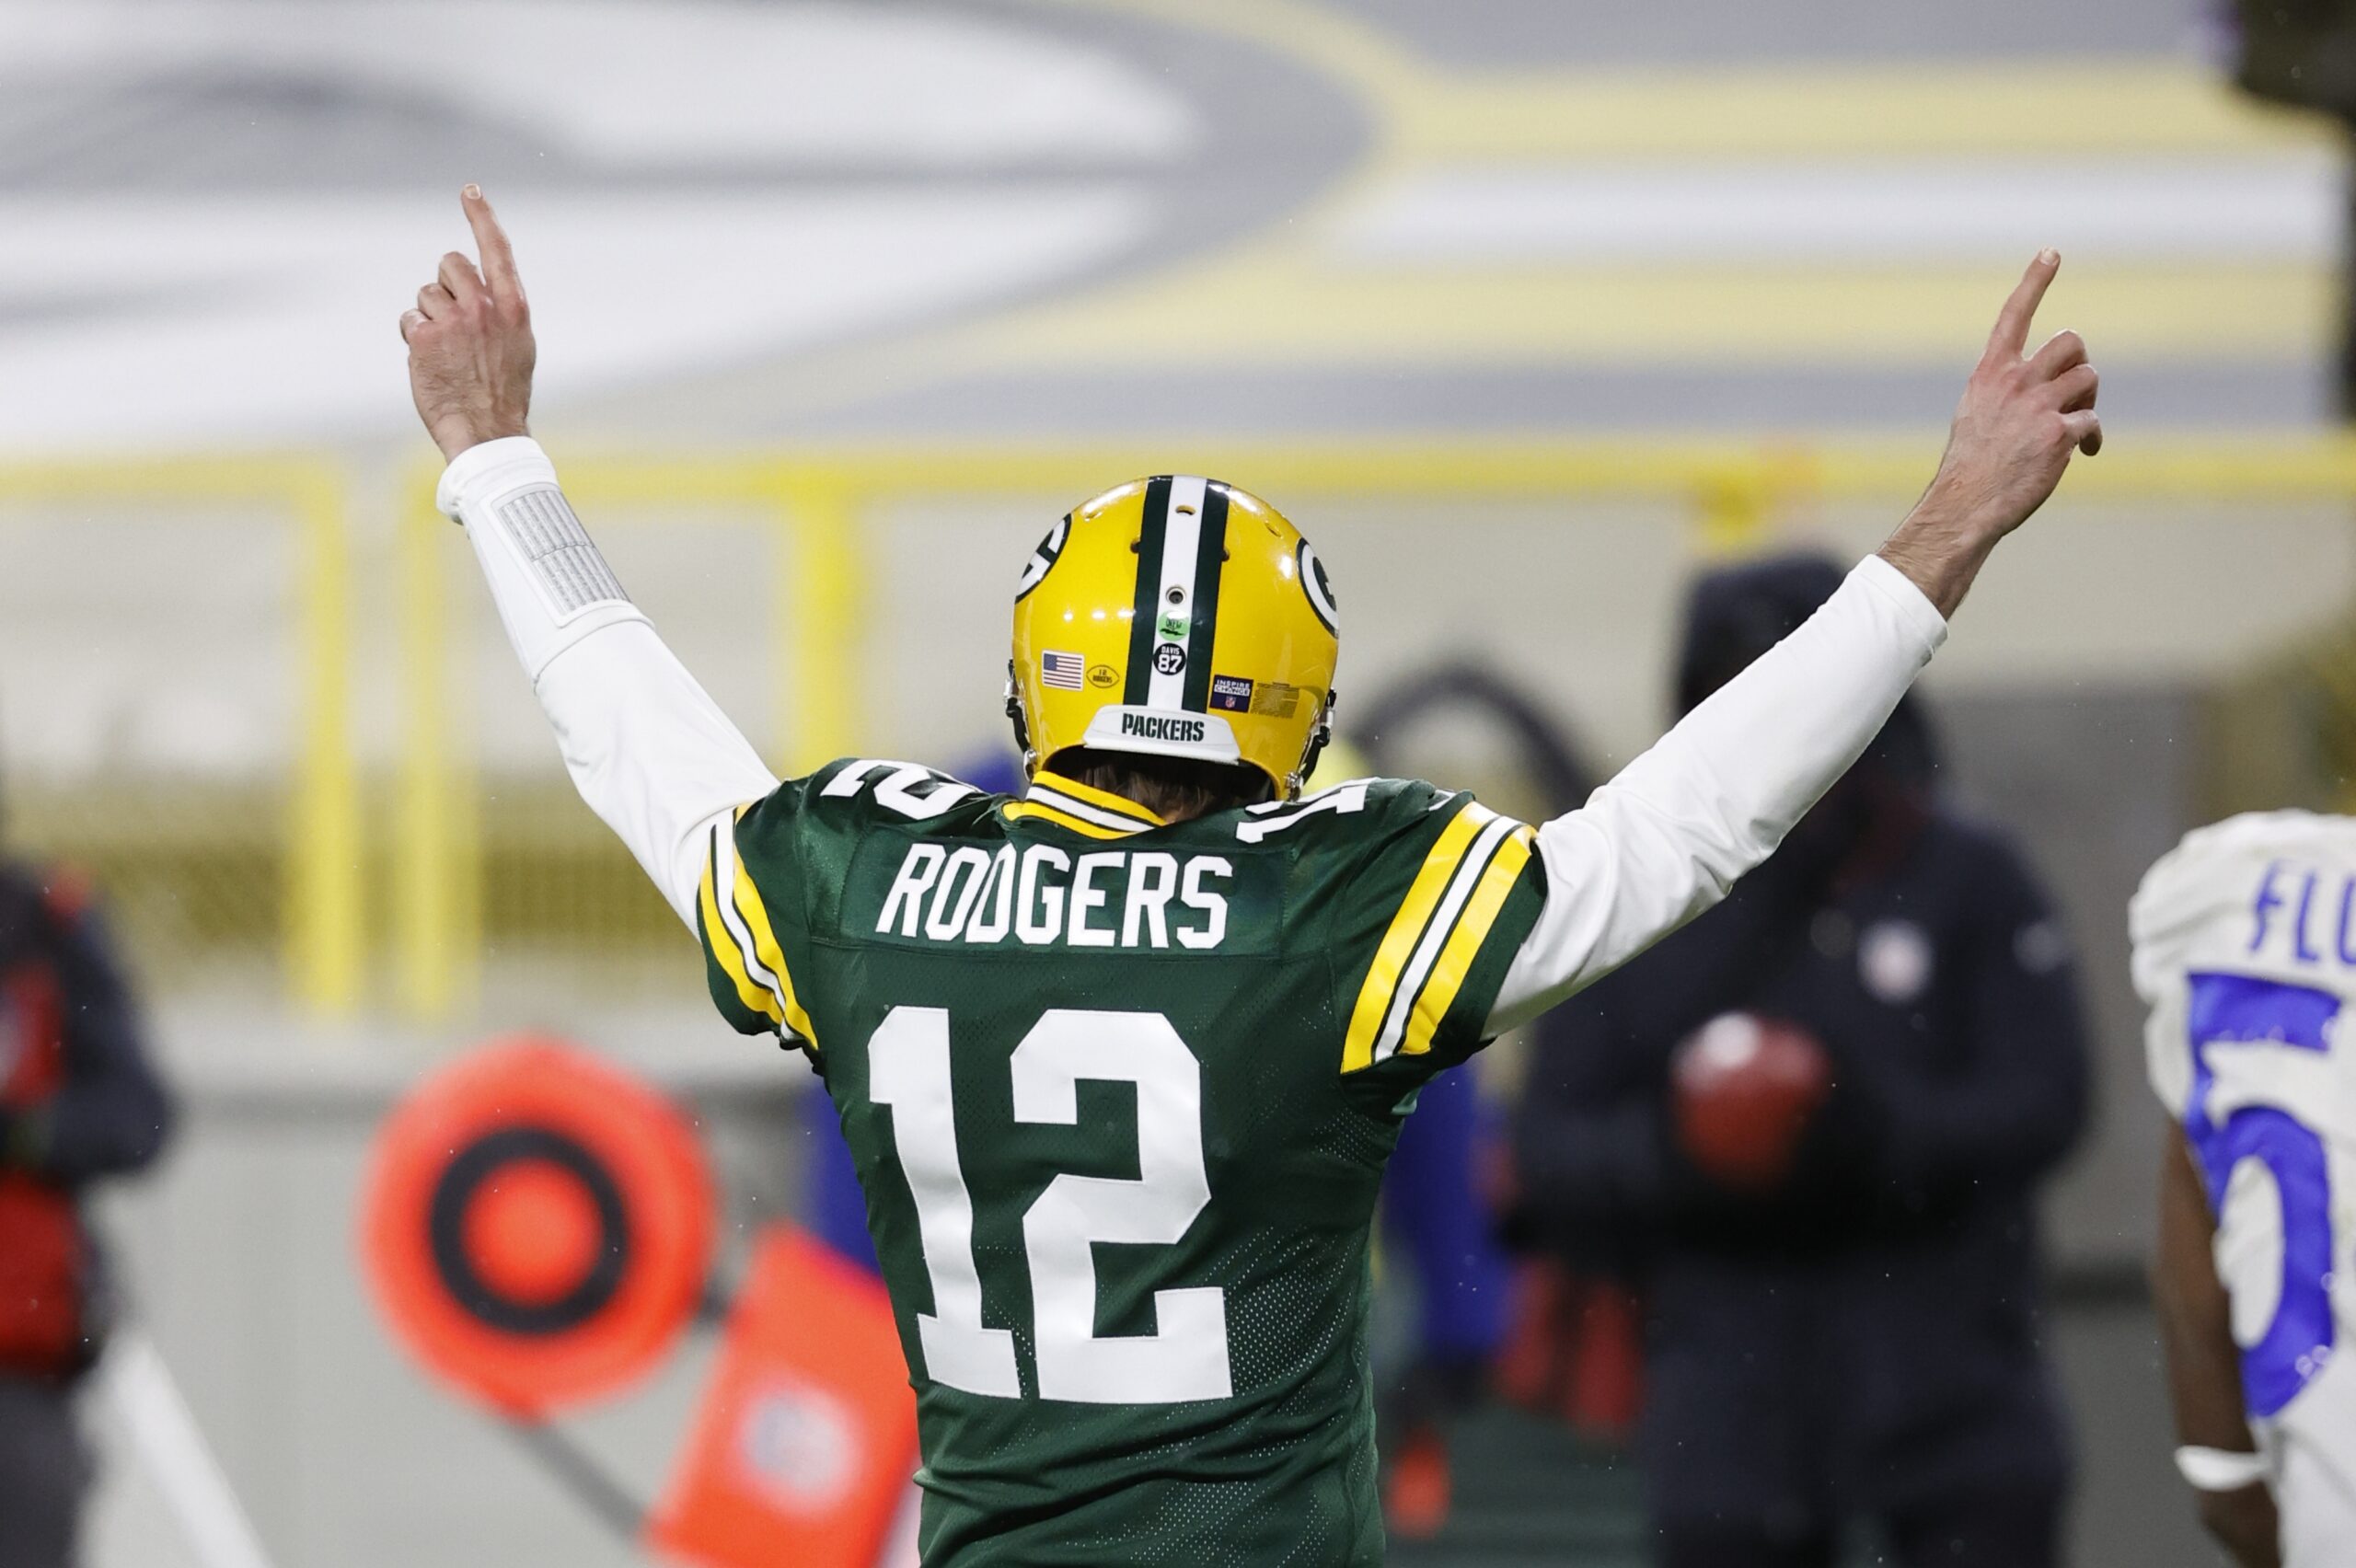 Aaron Rodgers confirms he will remain a Packer for next season